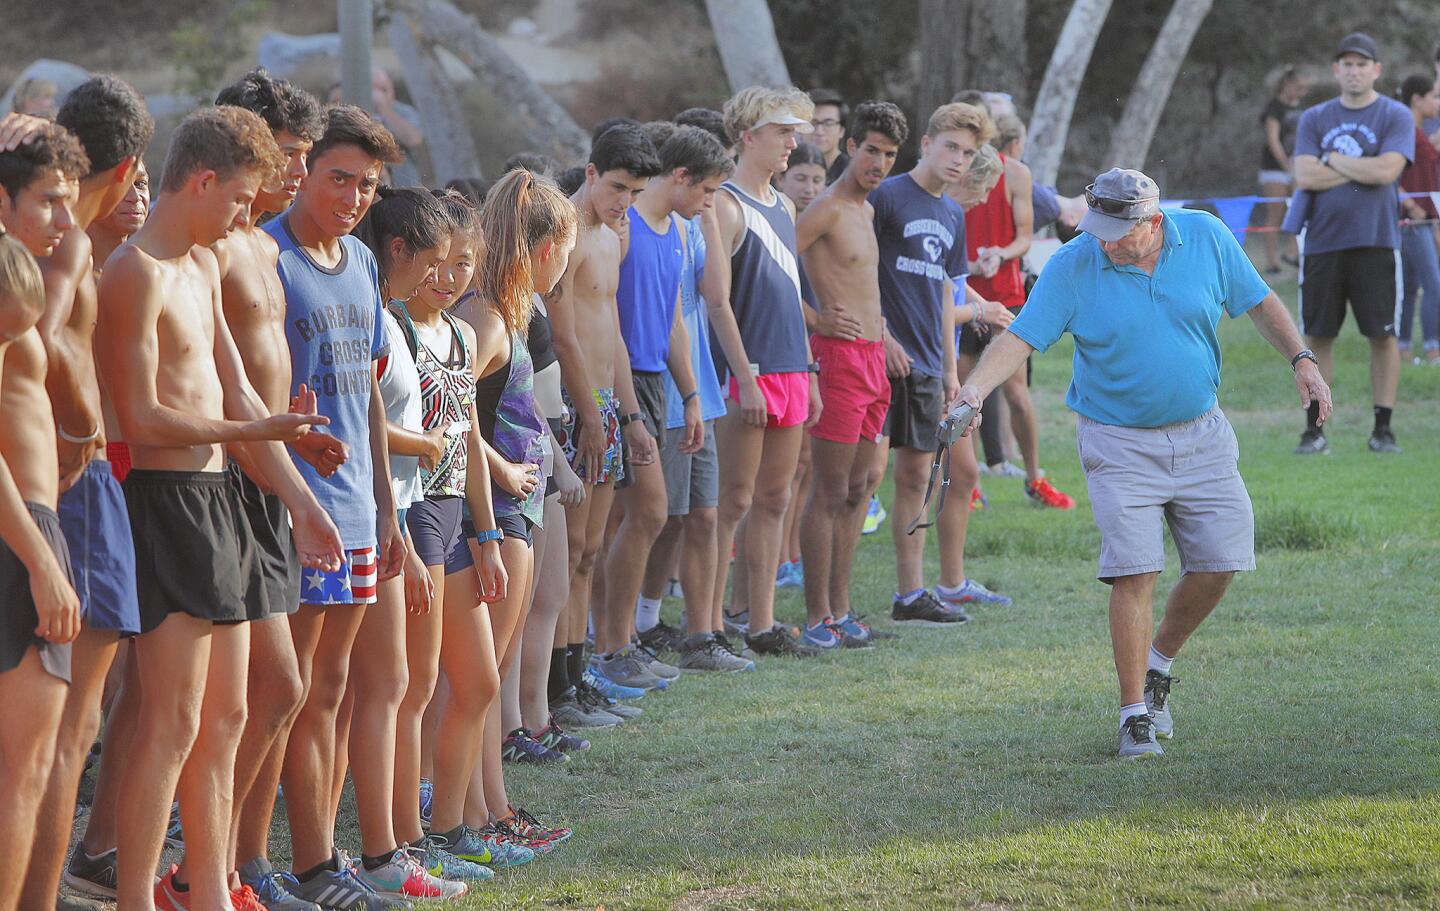 Photo Gallery: Cross-country meet at Crescenta Valley Regional Park